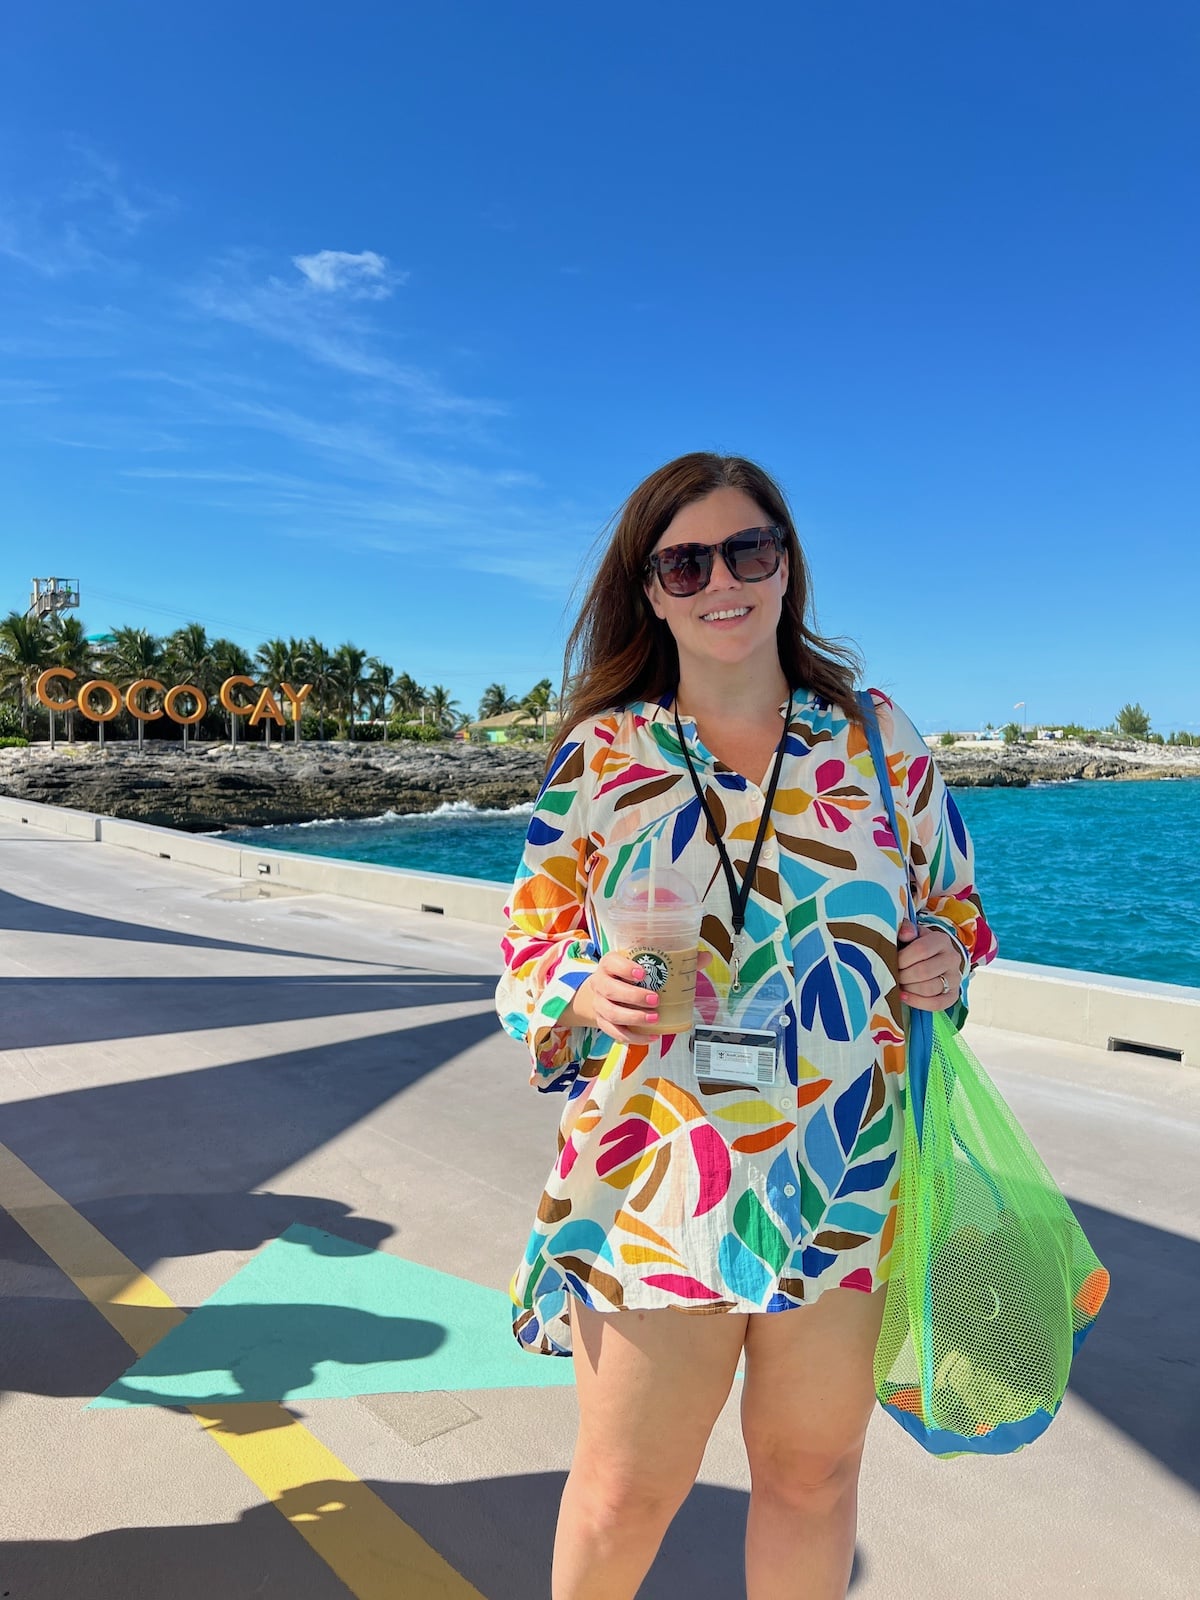 A woman in sunglasses and a colorful dress stands on a sunny boardwalk holding a mesh bag. The background features a sign reading "Coco Cay" and an ocean view.